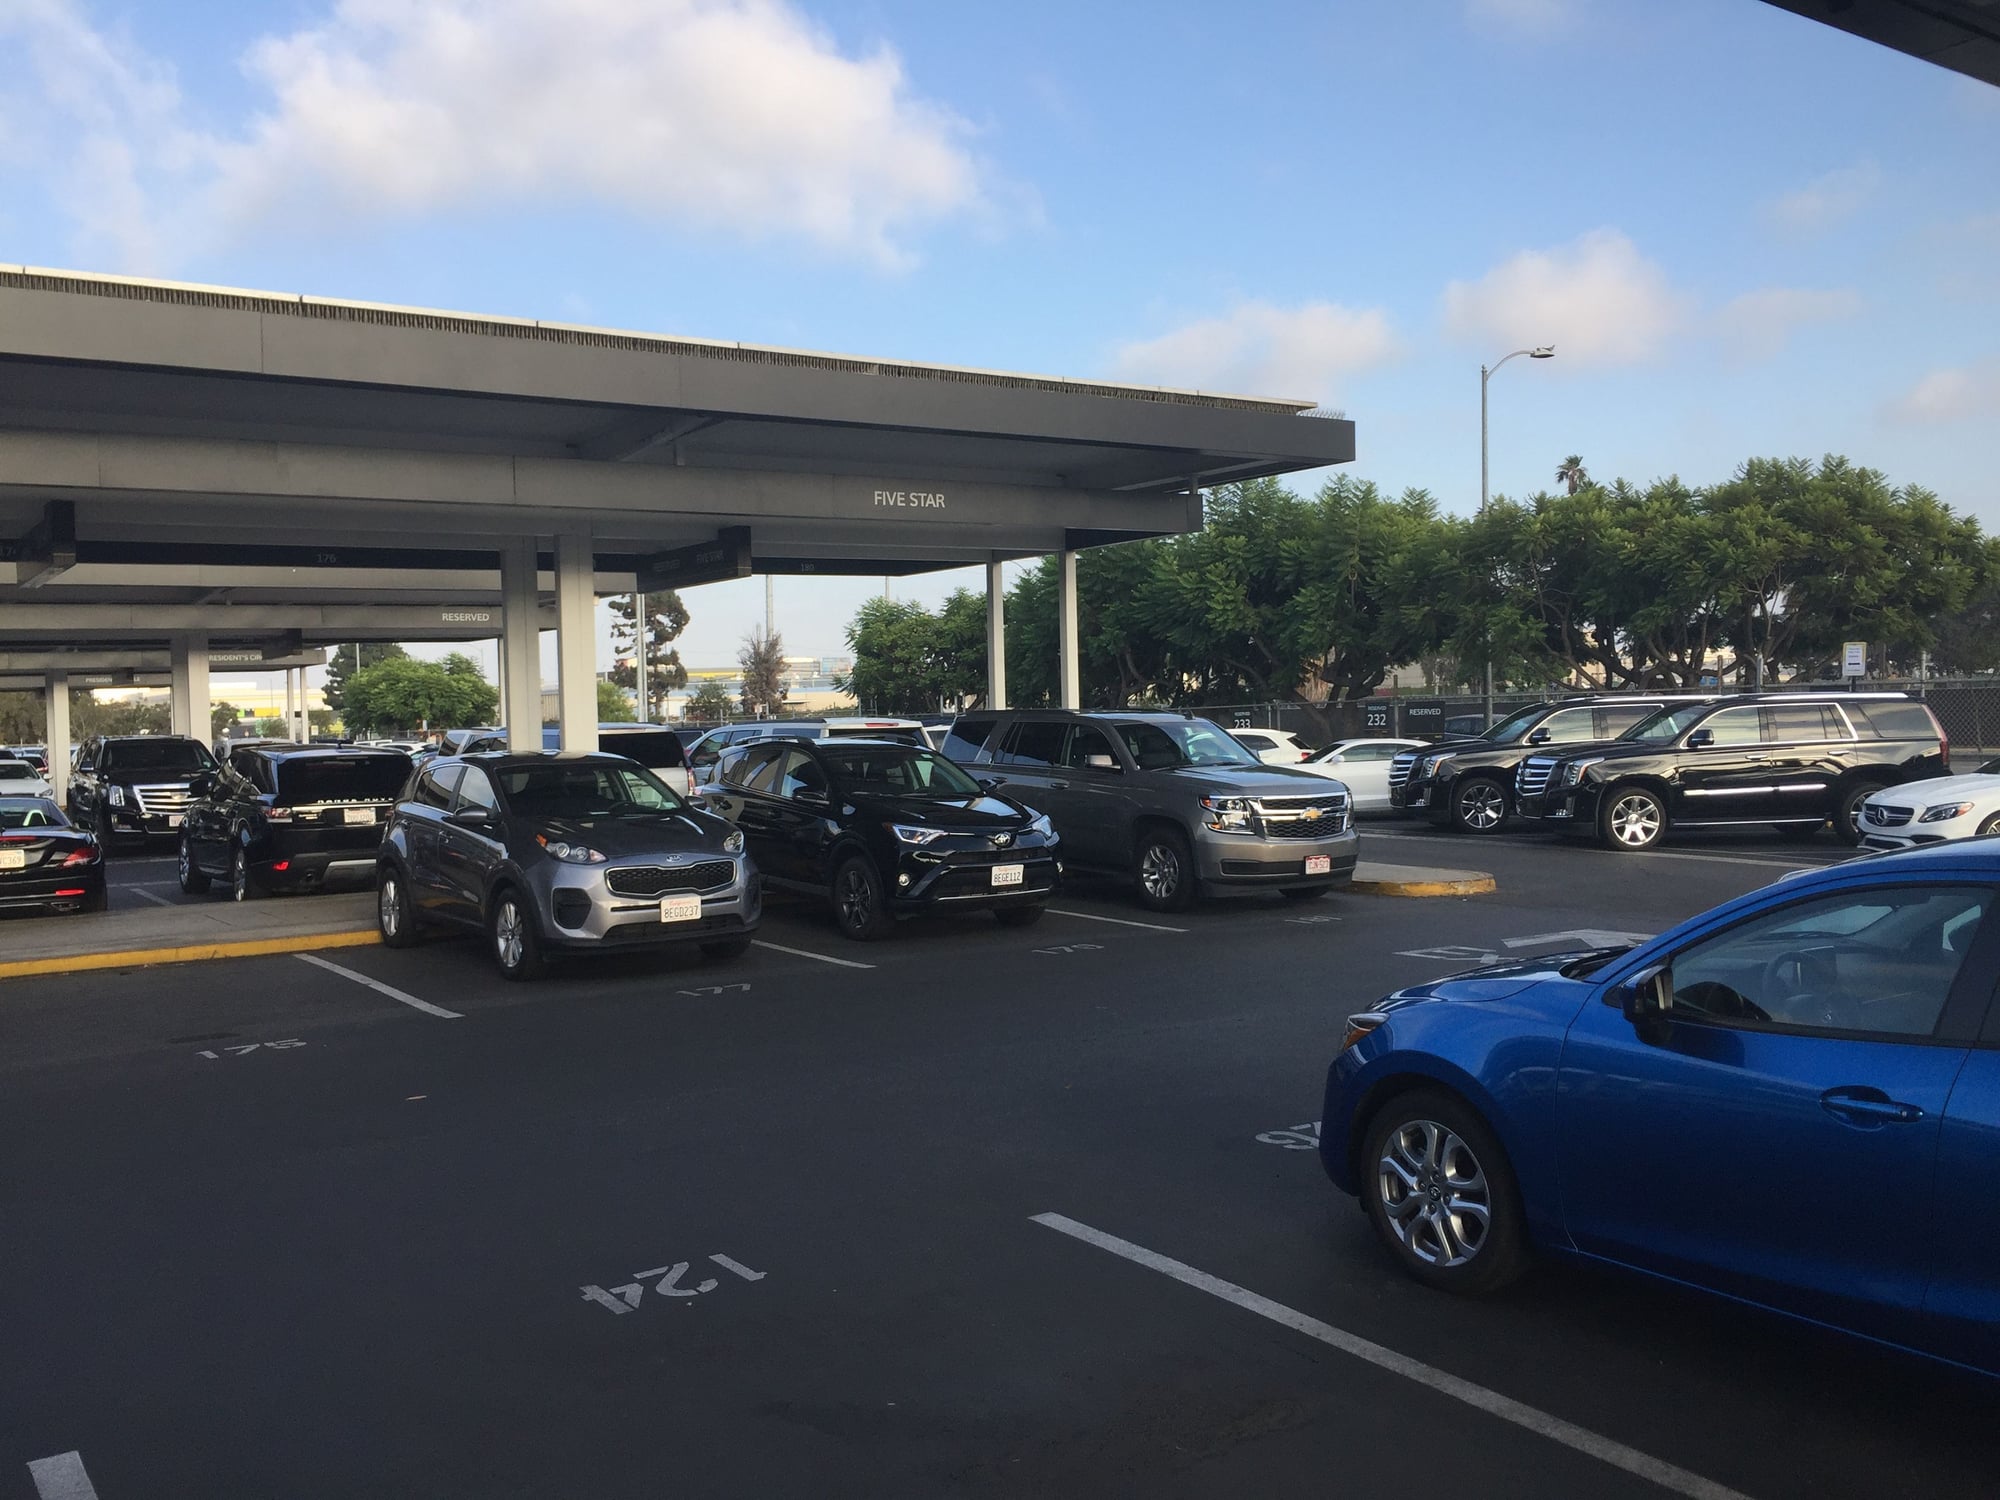 Consolidated "Renting at LAX; What Kind of Cars to Expect?" Thread